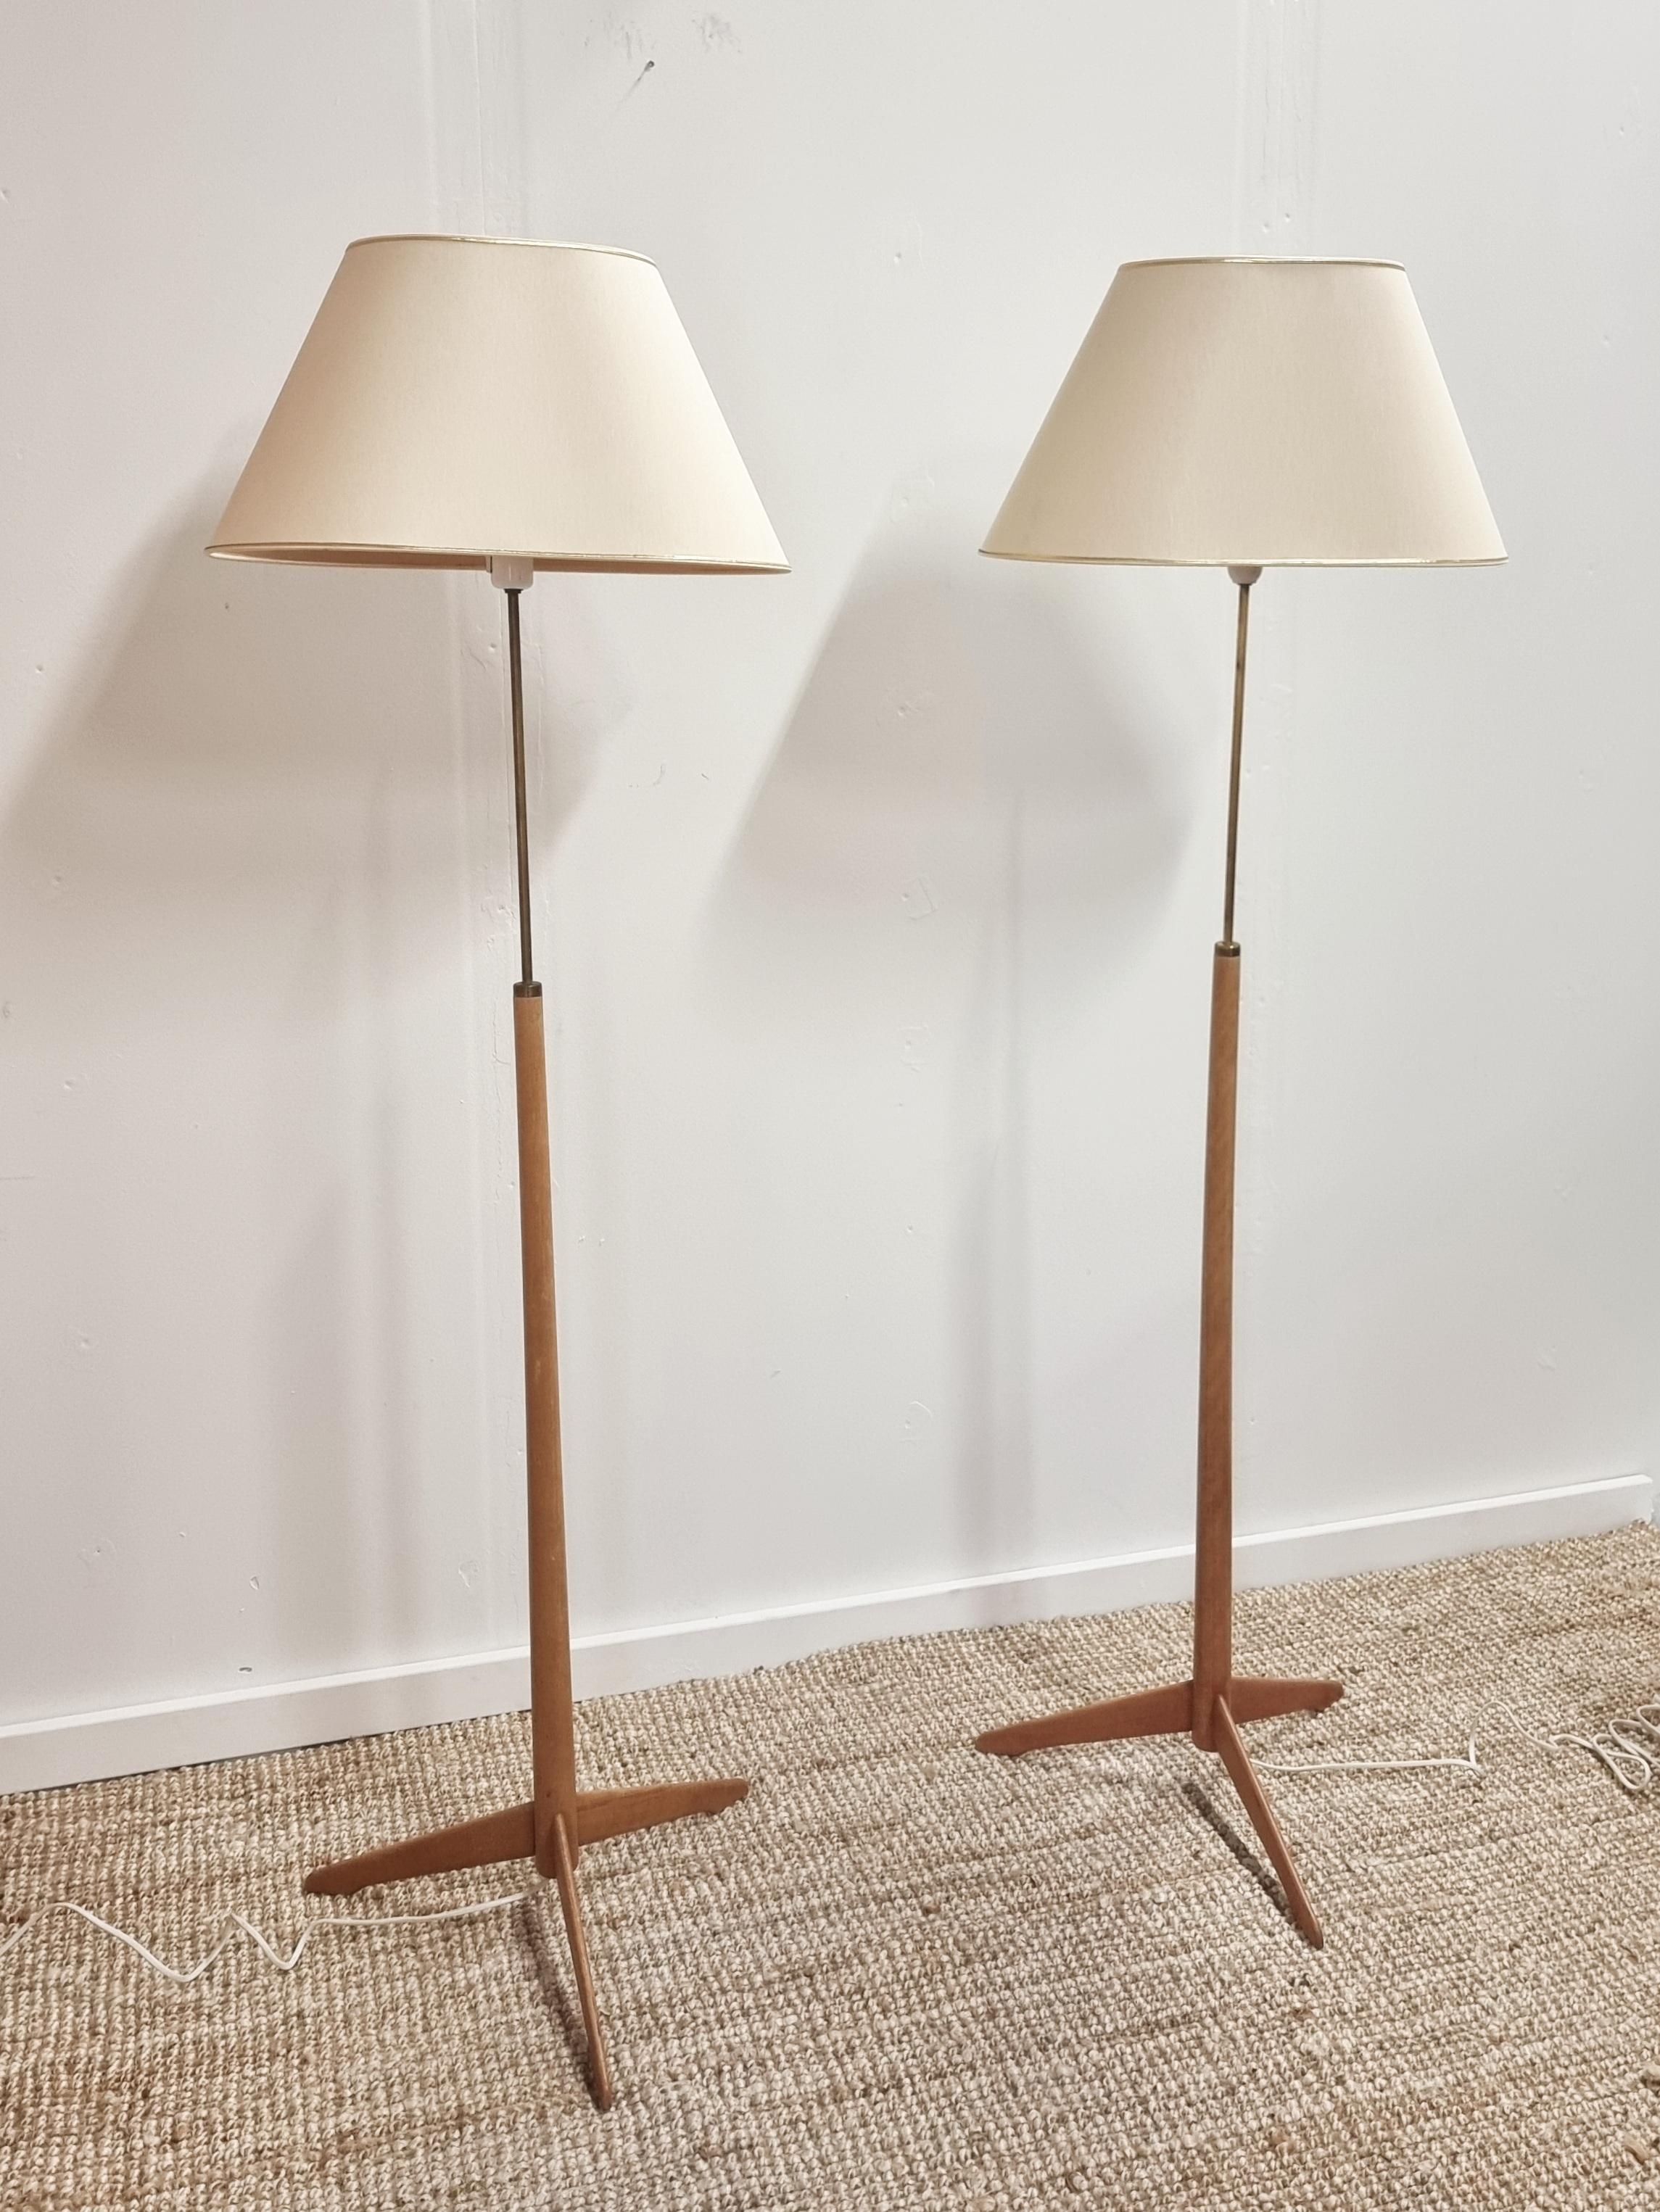 A pair of Midcentury / Scandinavian Modern floor lamps, model G.34. Designed by Alf Svensson for Bergboms, Sweden mid1900s.

Base in wood and brass. Marked on brass: BERGBOM & G-34.

In good condition, smaller signs of age and wear. The wood base